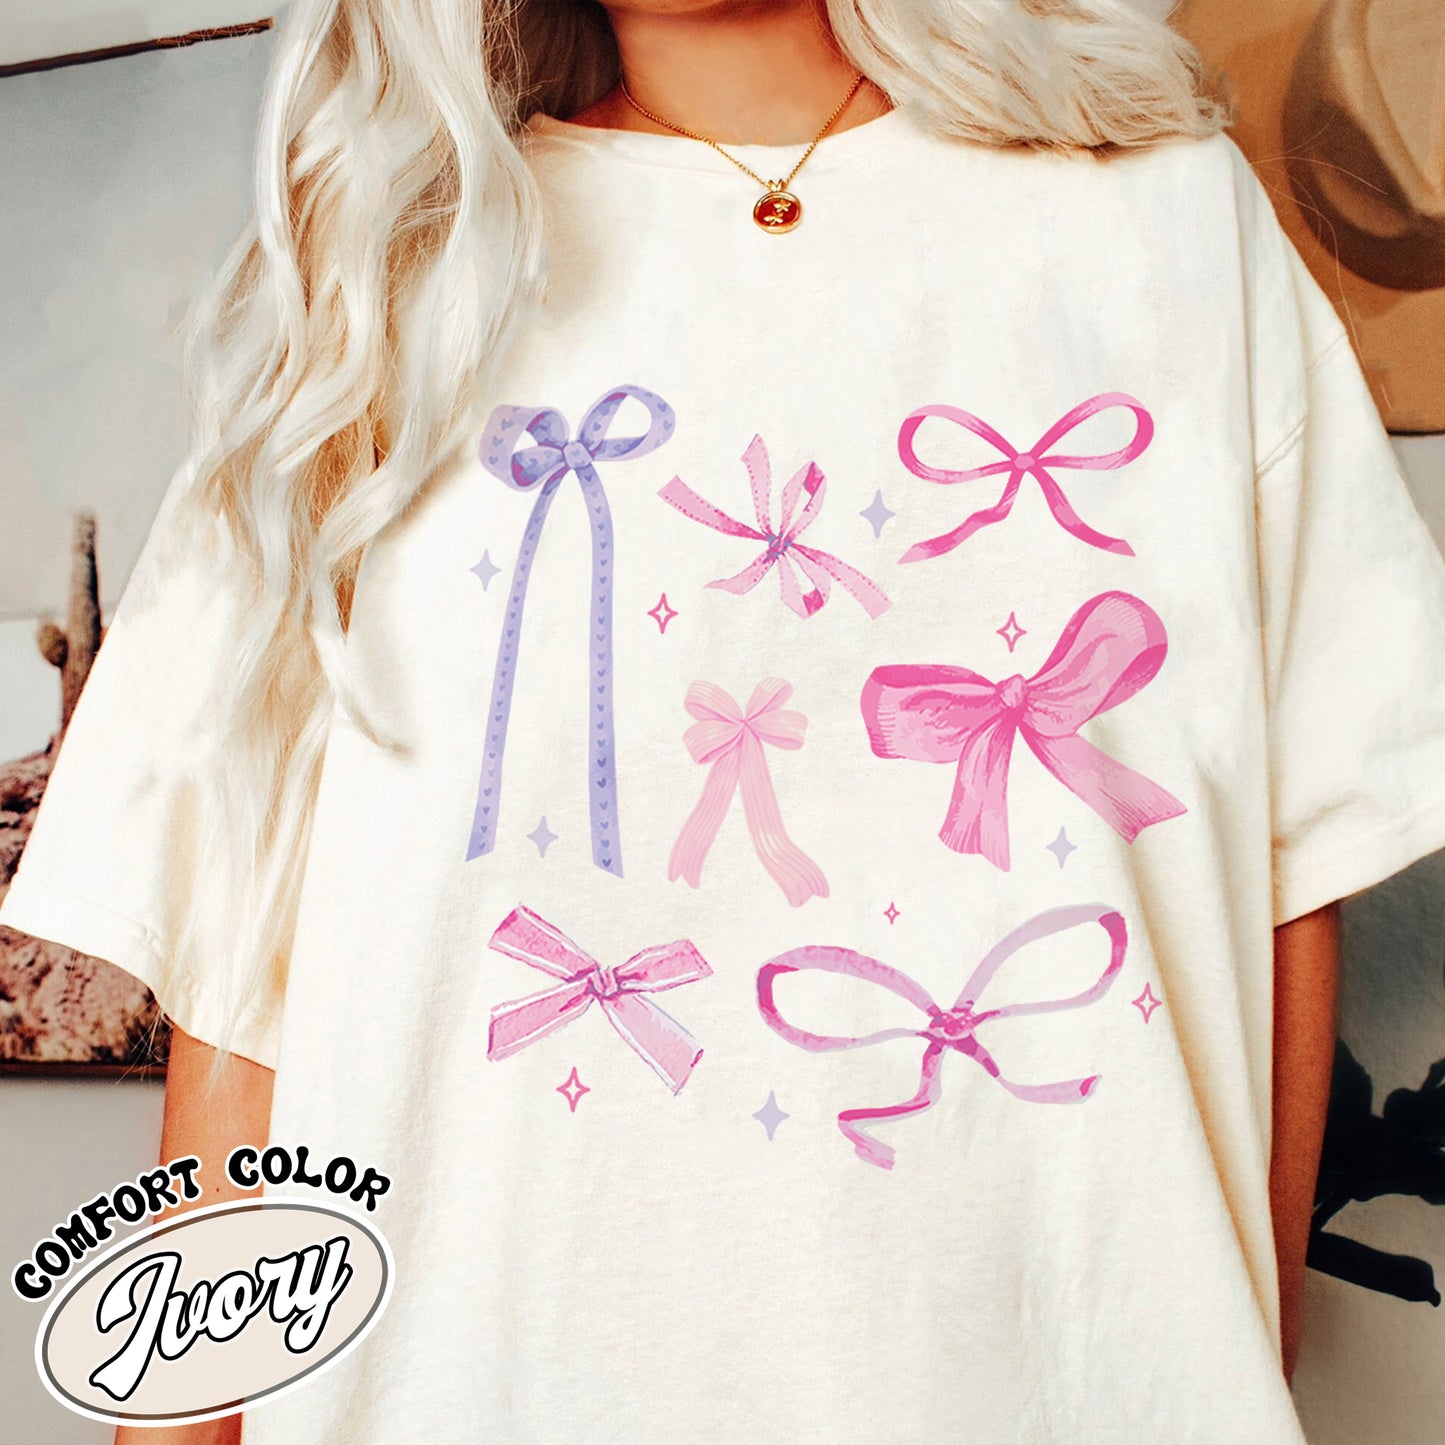 Coquette Pink Bow Comfort Color Shirt, Trendy Pink Bow Clothing, Pink Bow, Pink Bow, Coquette Shirt, Aesthetic Pink Bow